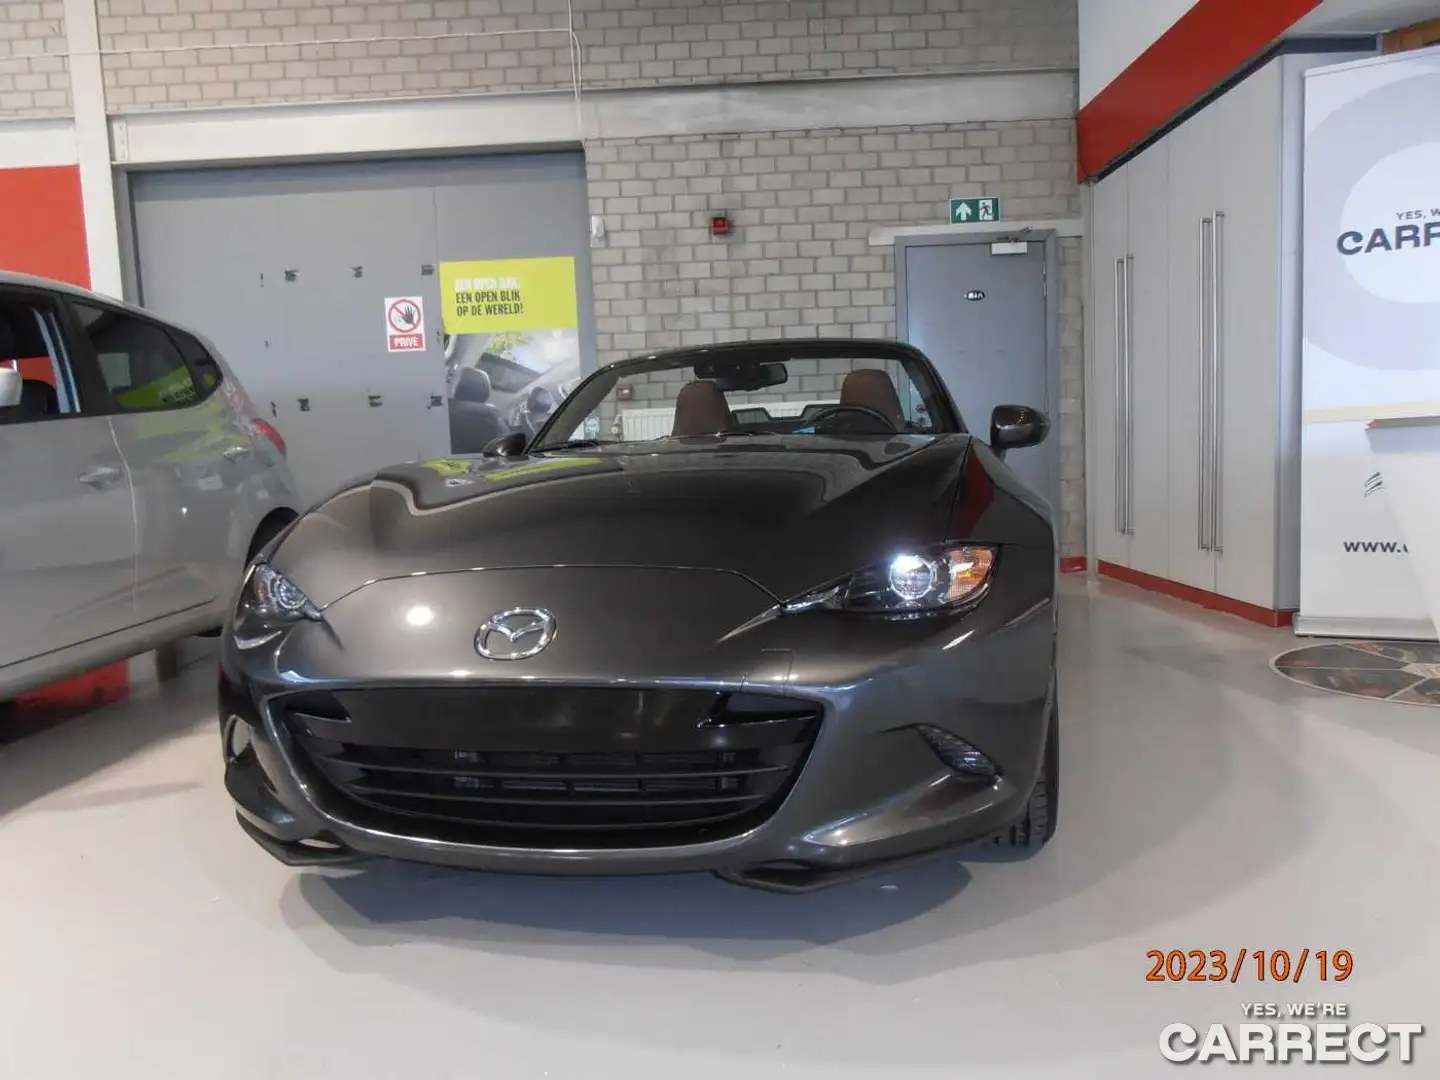 Mazda MX-5 - 2018 NEW CONDITION - THE BEST ROADSTER - 12 M WA Grey - 2